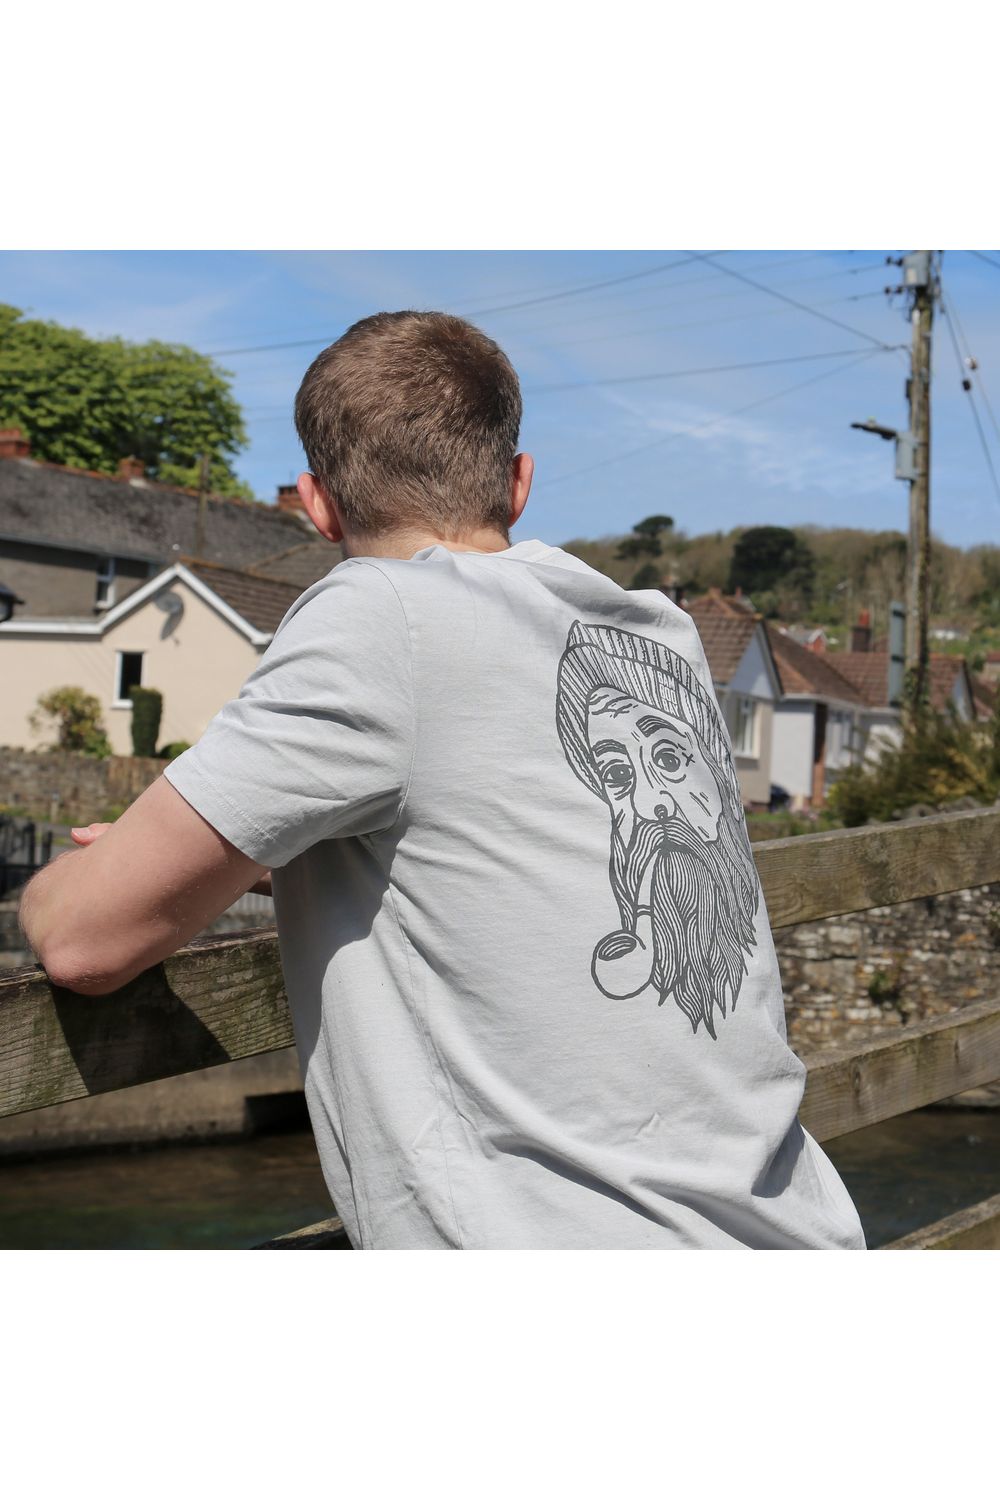 Bamboobay Grey Tshirt from the back with fisherman design